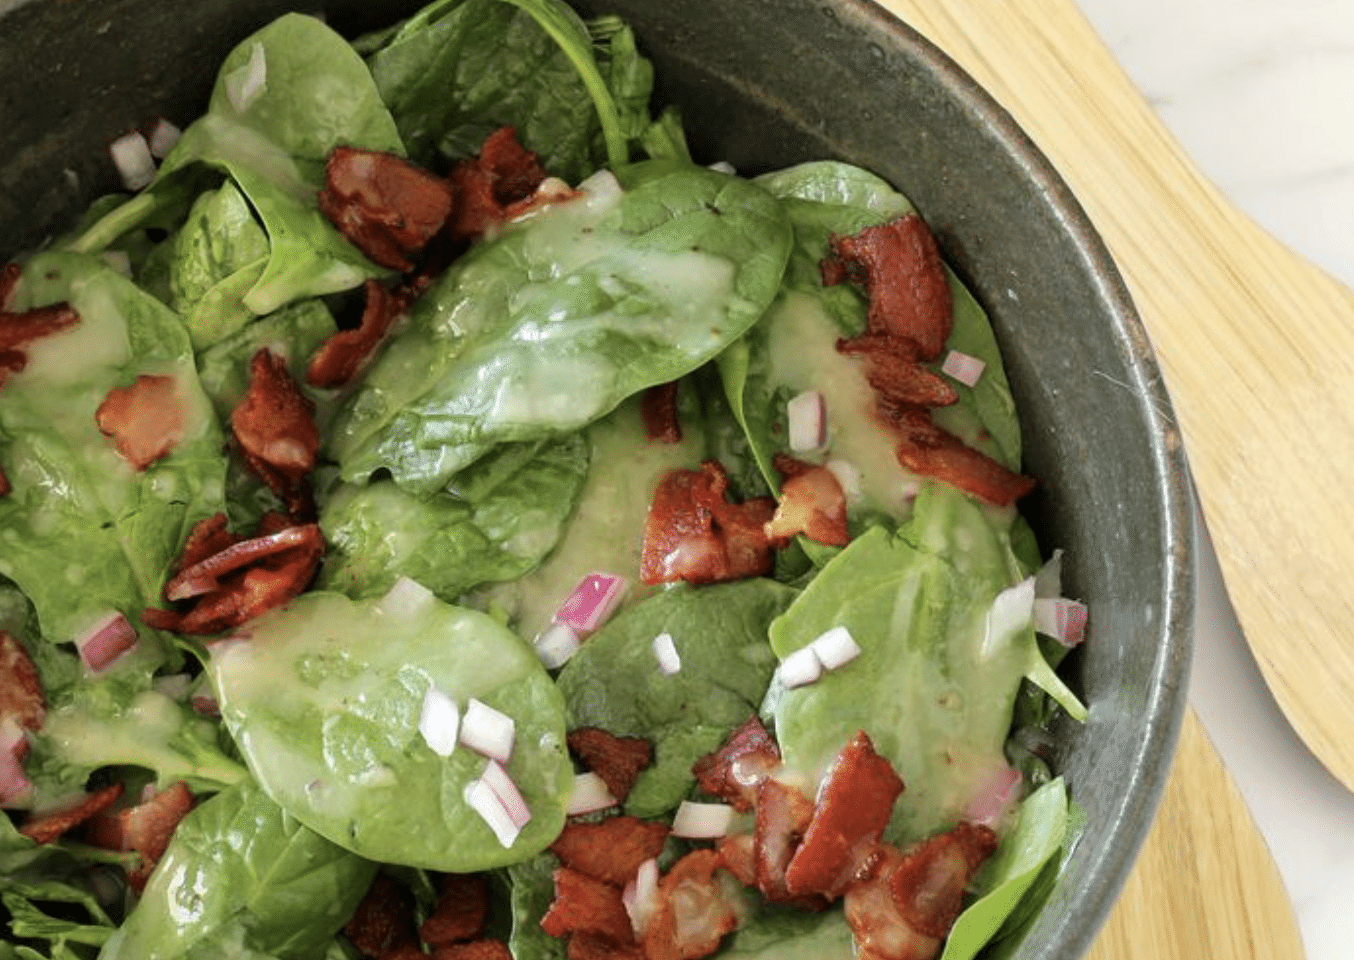 Wilted Spinach & Bacon Salad